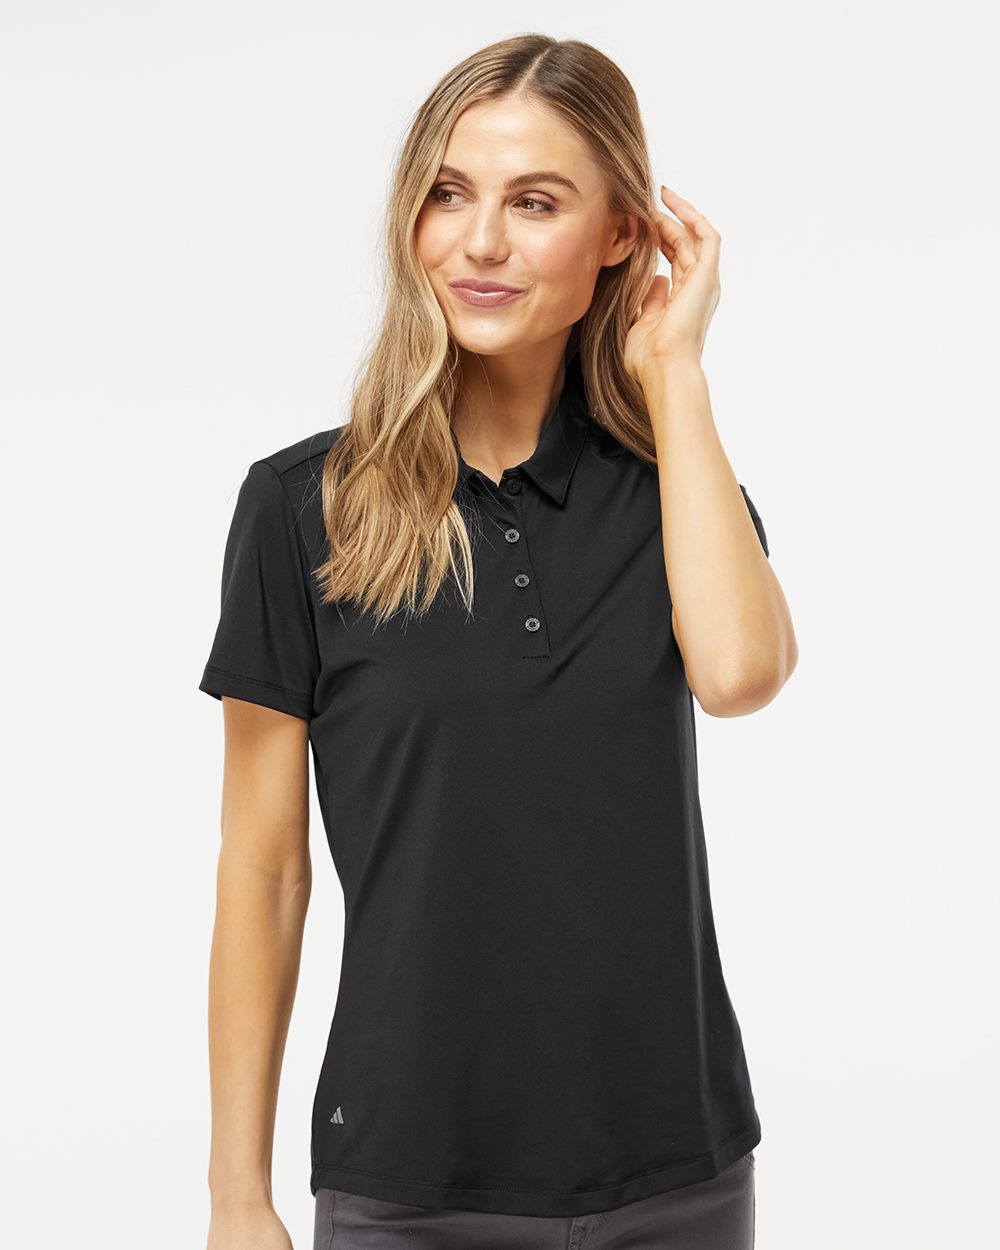 Adidas A515 Women's Ultimate Solid Polo